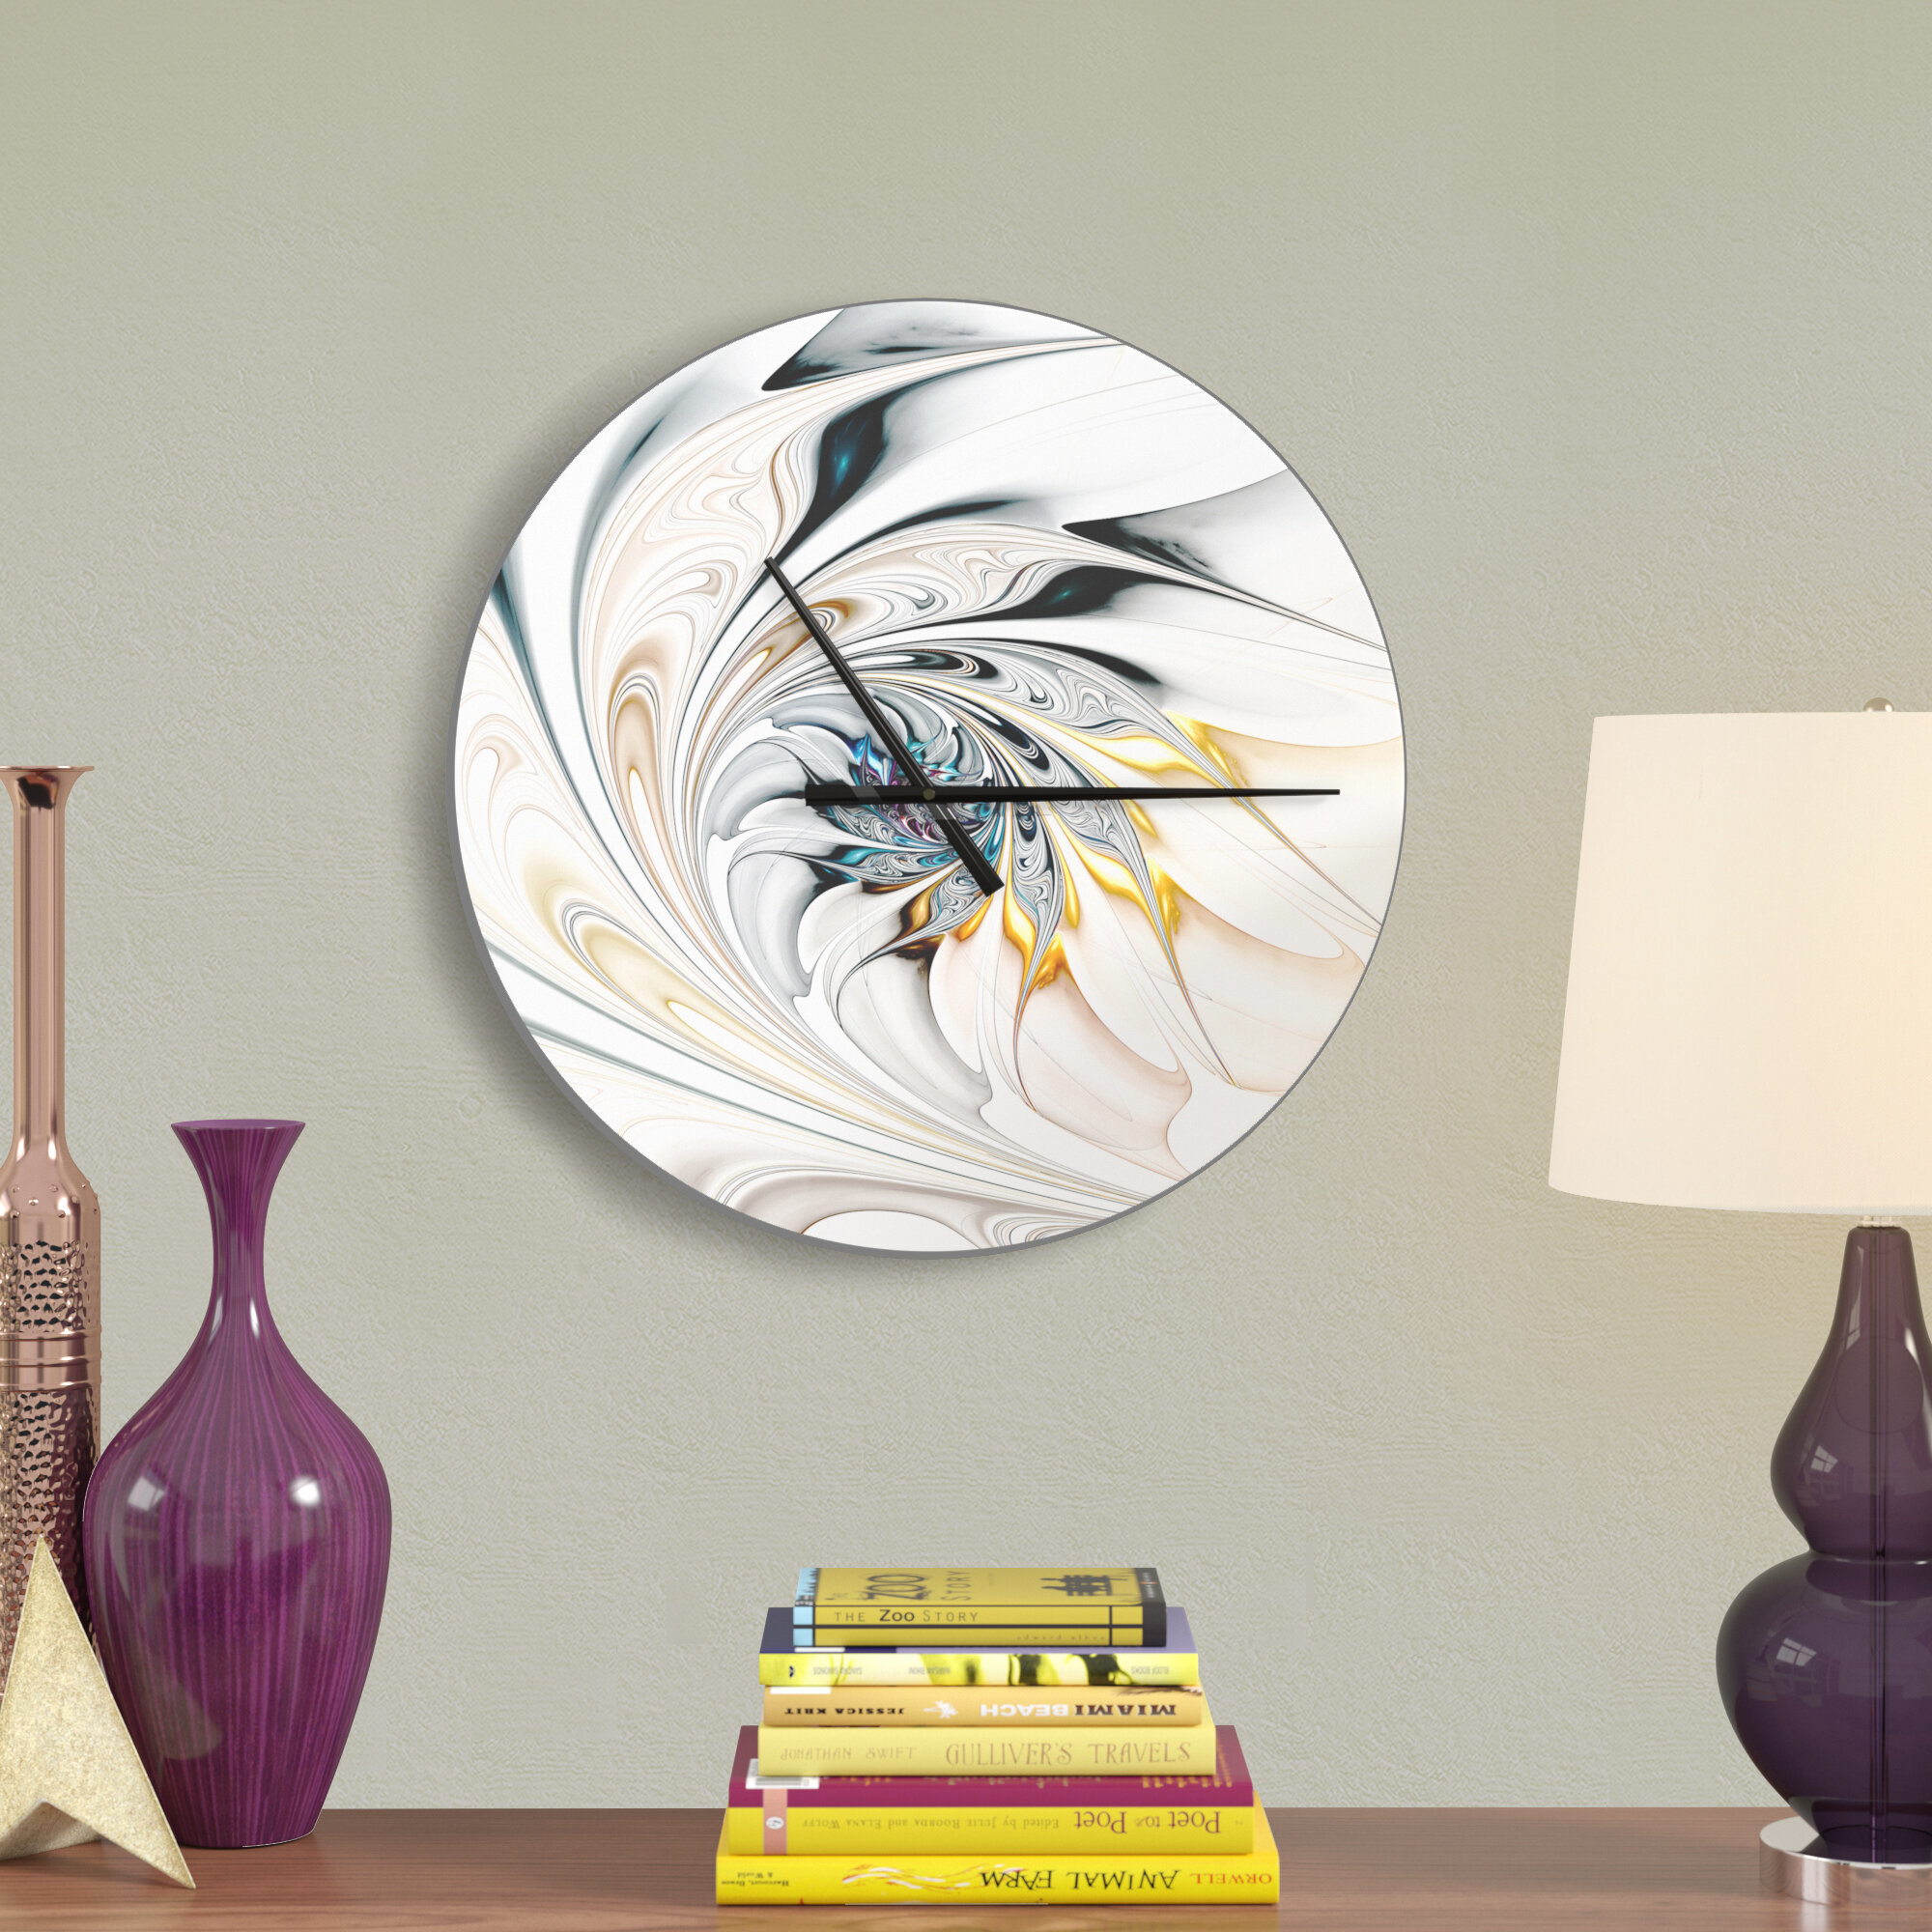 East Urban Home Stained Glass Floral Art Wall Clock Reviews Wayfair